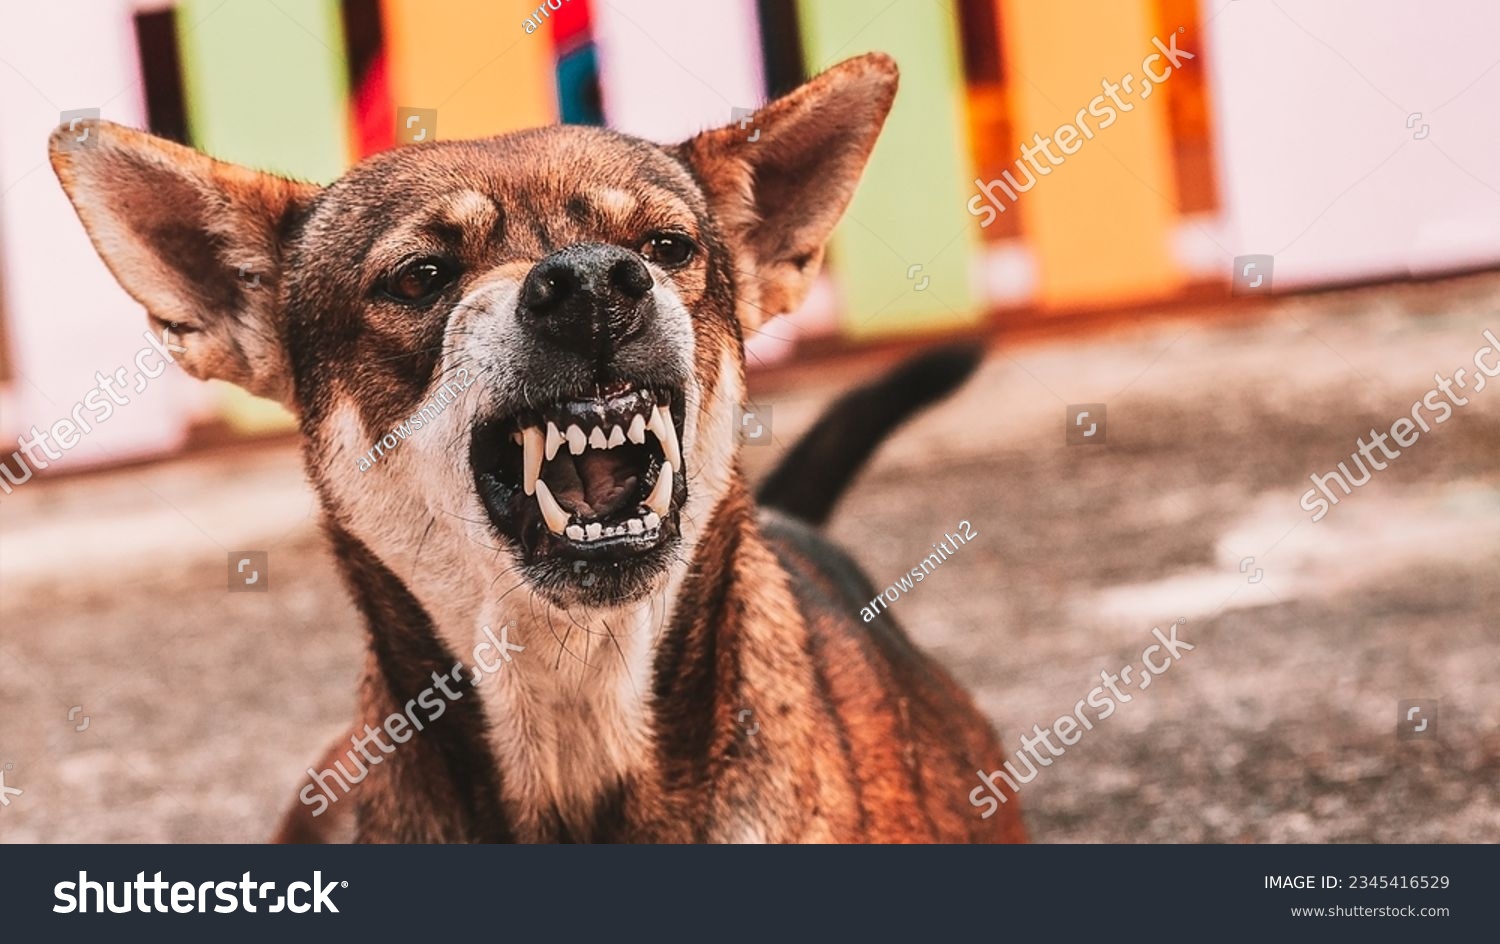 Aggressive dog shows dangerous teeth.Angry Animal hard attack head detail with copy space #2345416529